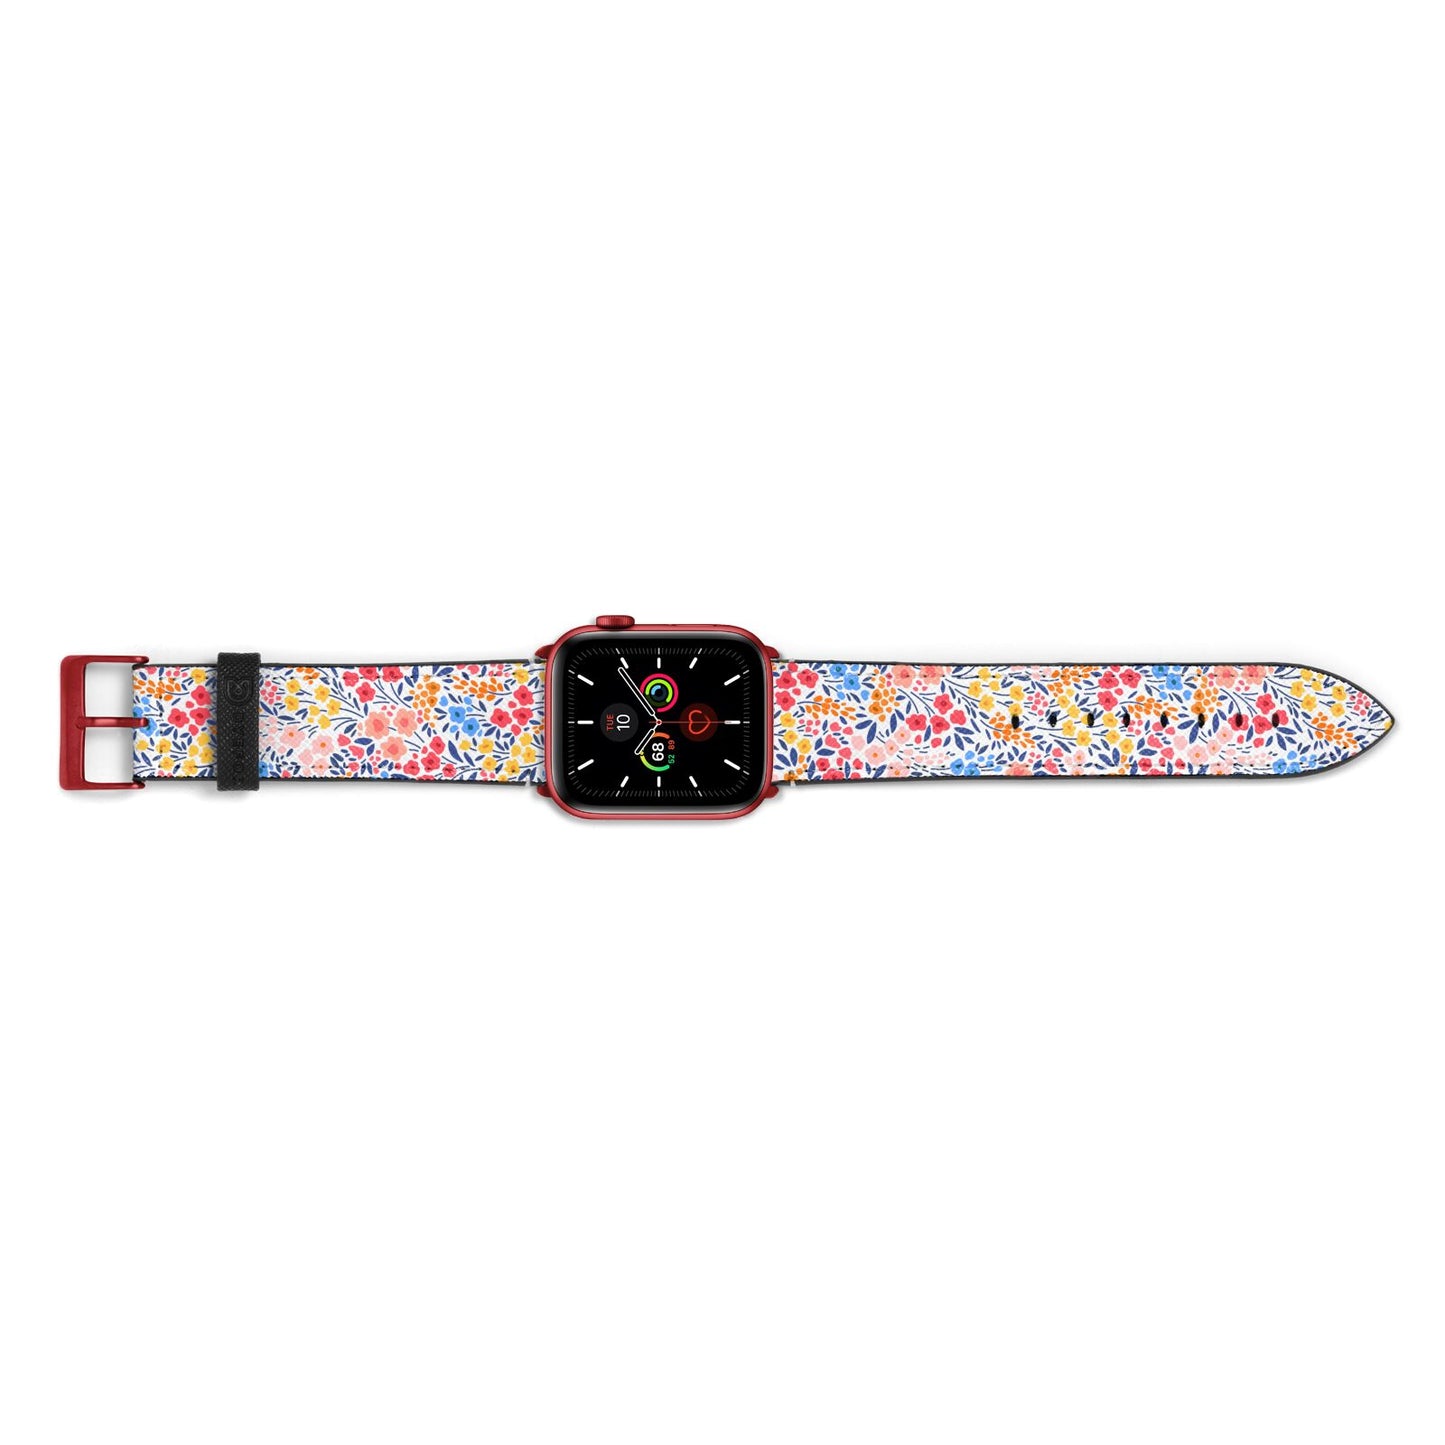 Small Flowers Apple Watch Strap Landscape Image Red Hardware